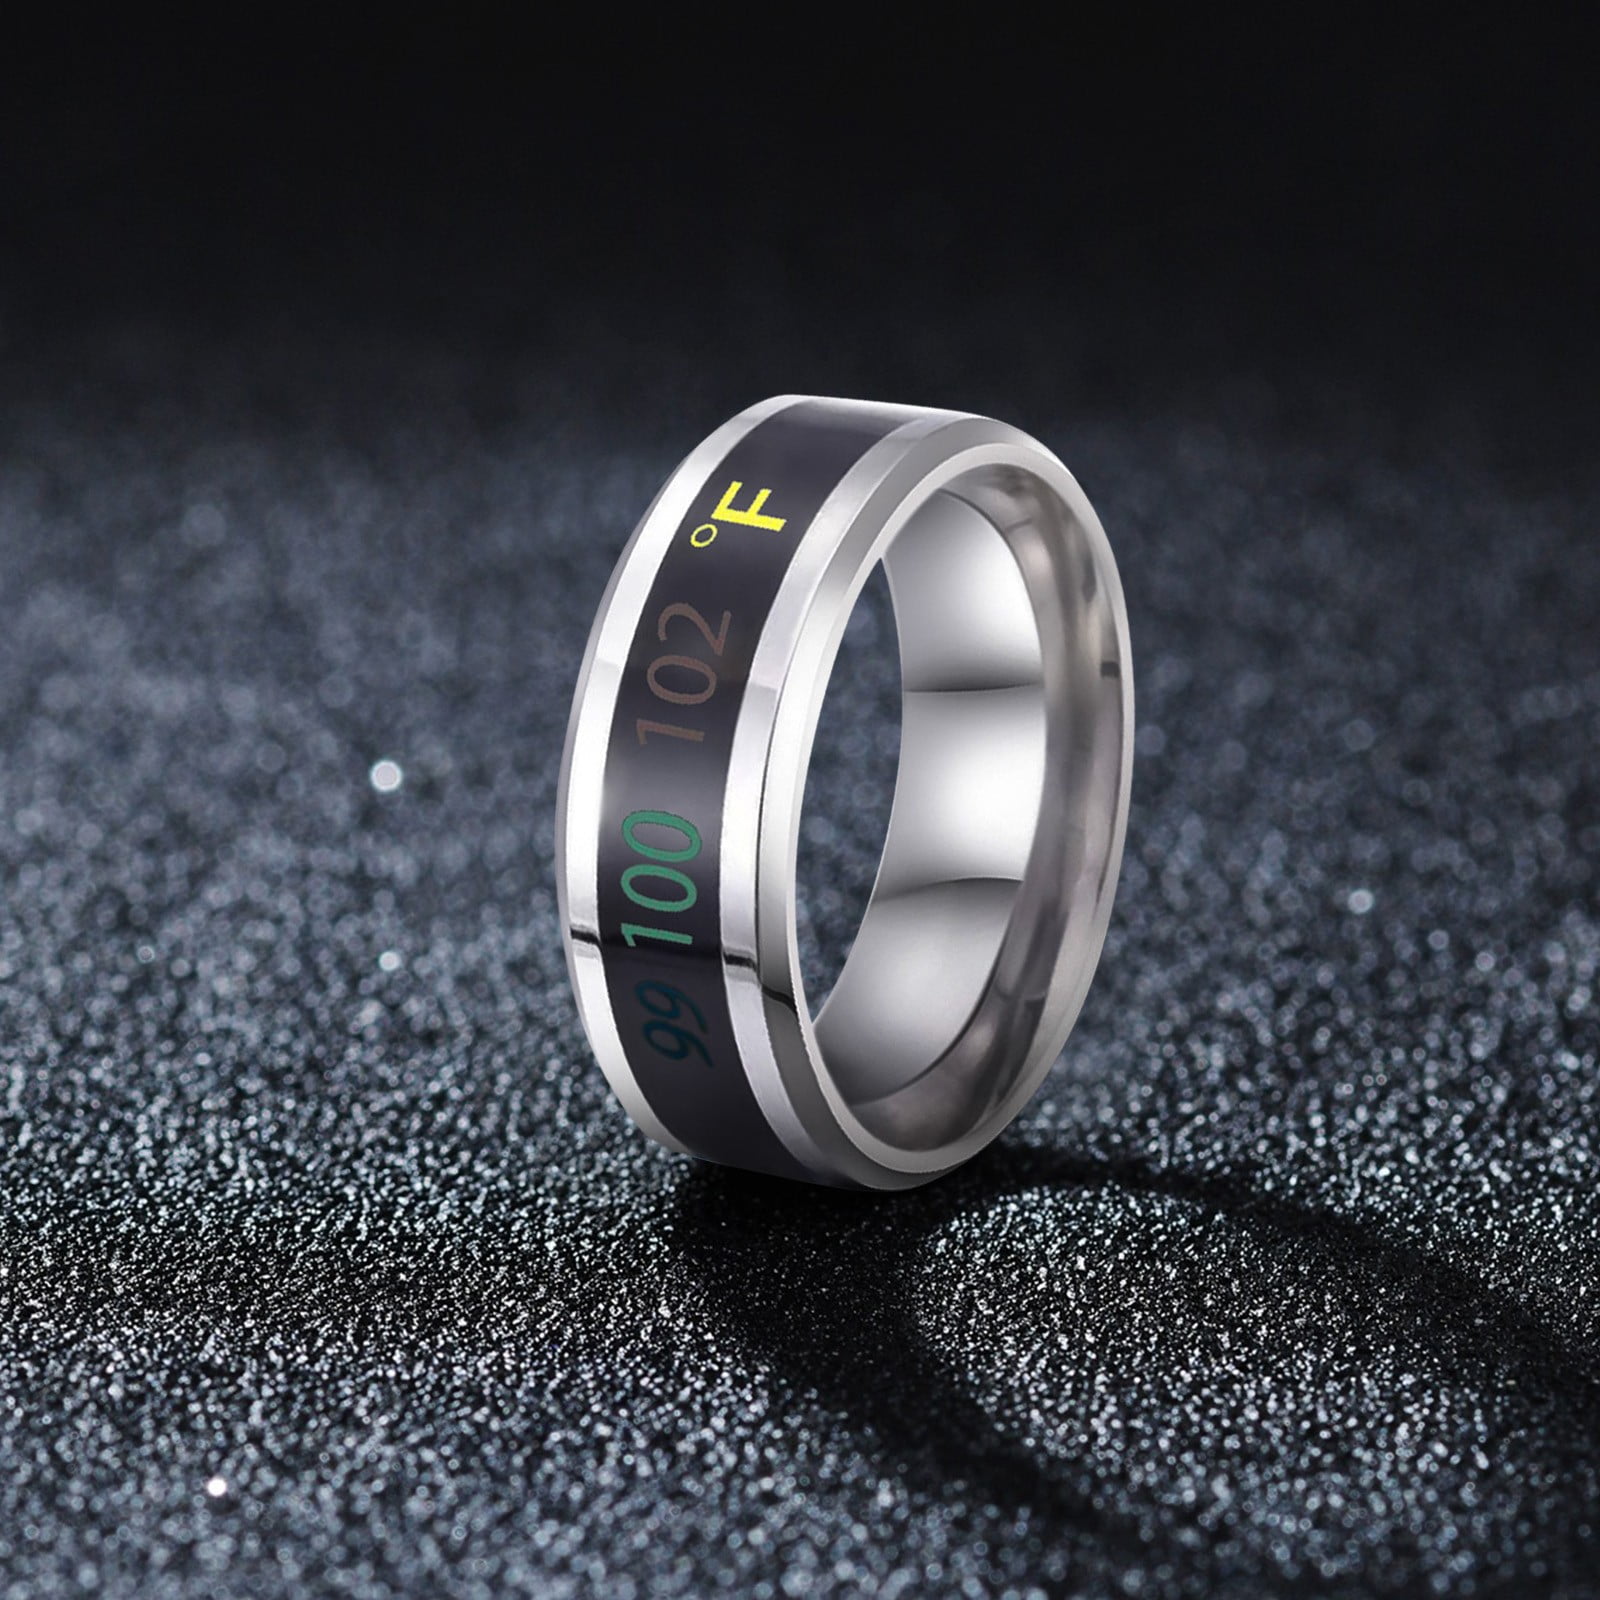 This OLED Ring Uses Bluetooth to Display Notifications from a Phone – Video